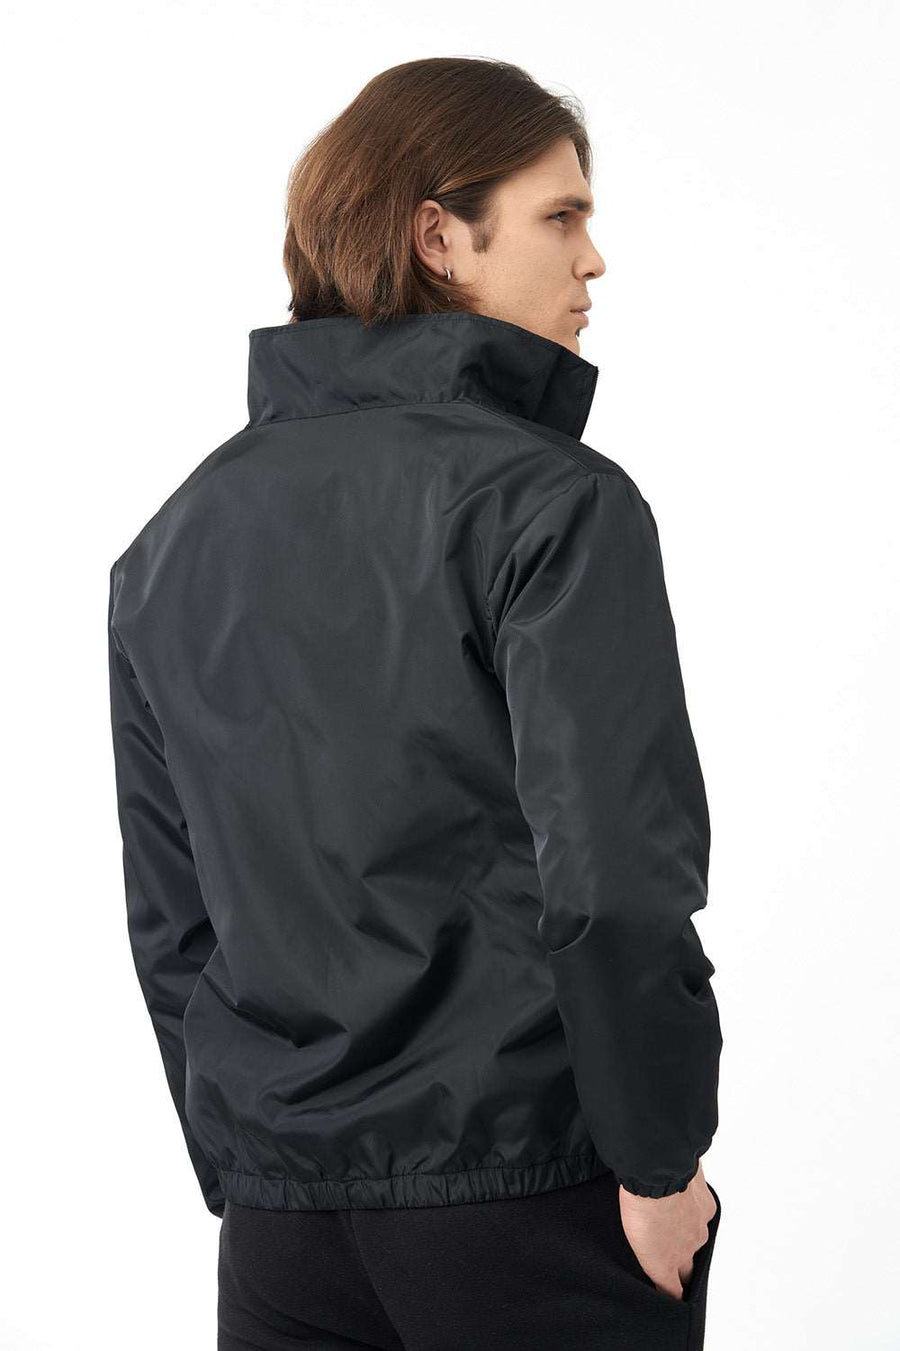 Back View of Full Zipped Active Funnel Neck Jackets for Men